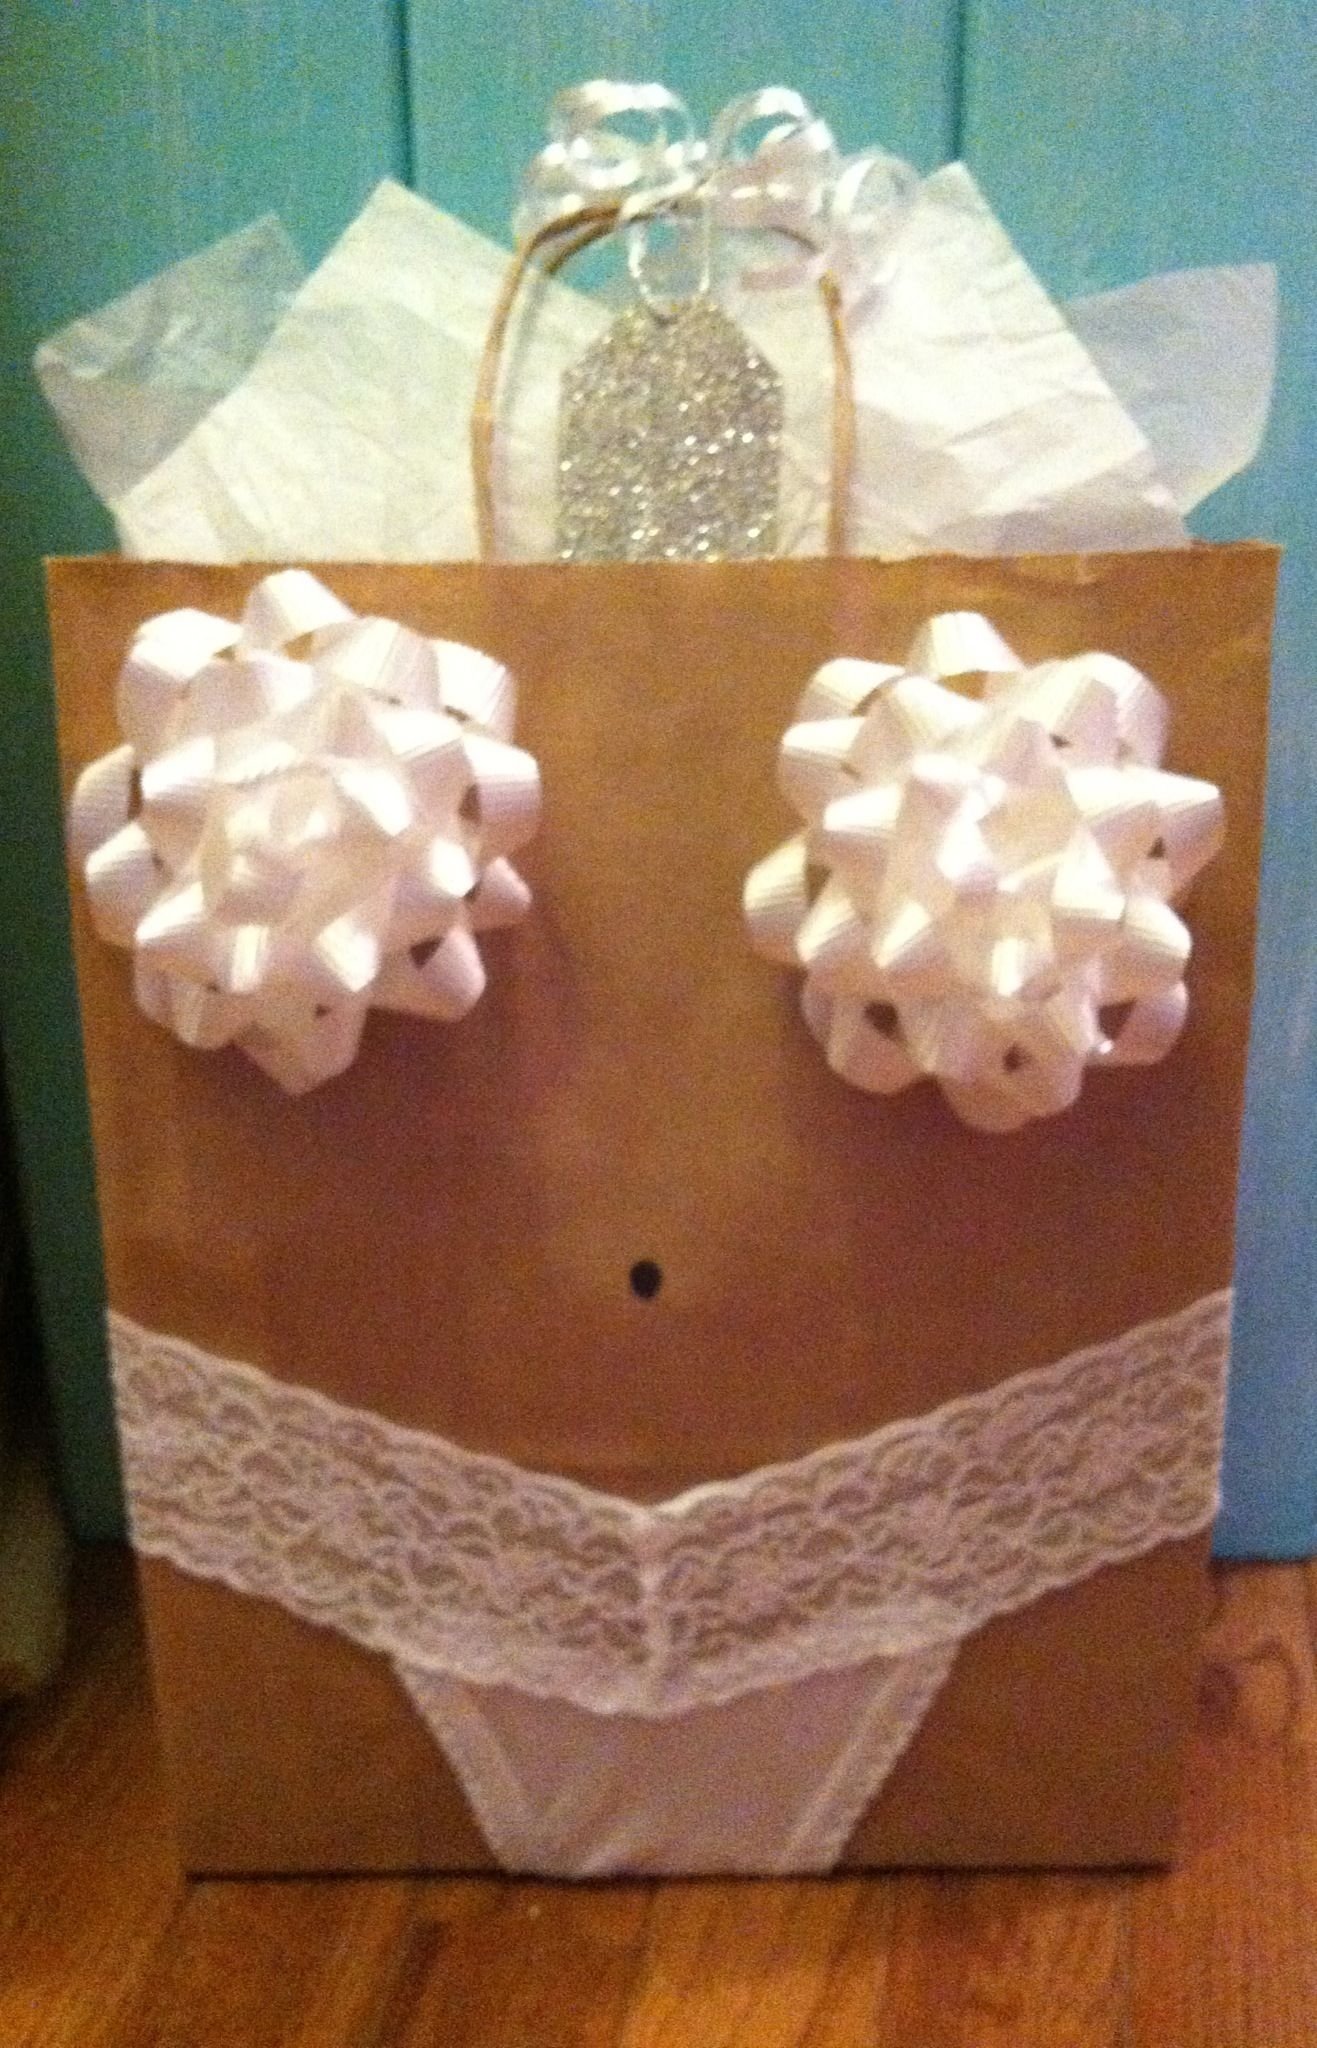 10 Wonderful Gift Ideas For The Bride lingerie shower gift wrap idea next person to get married is 8 2022